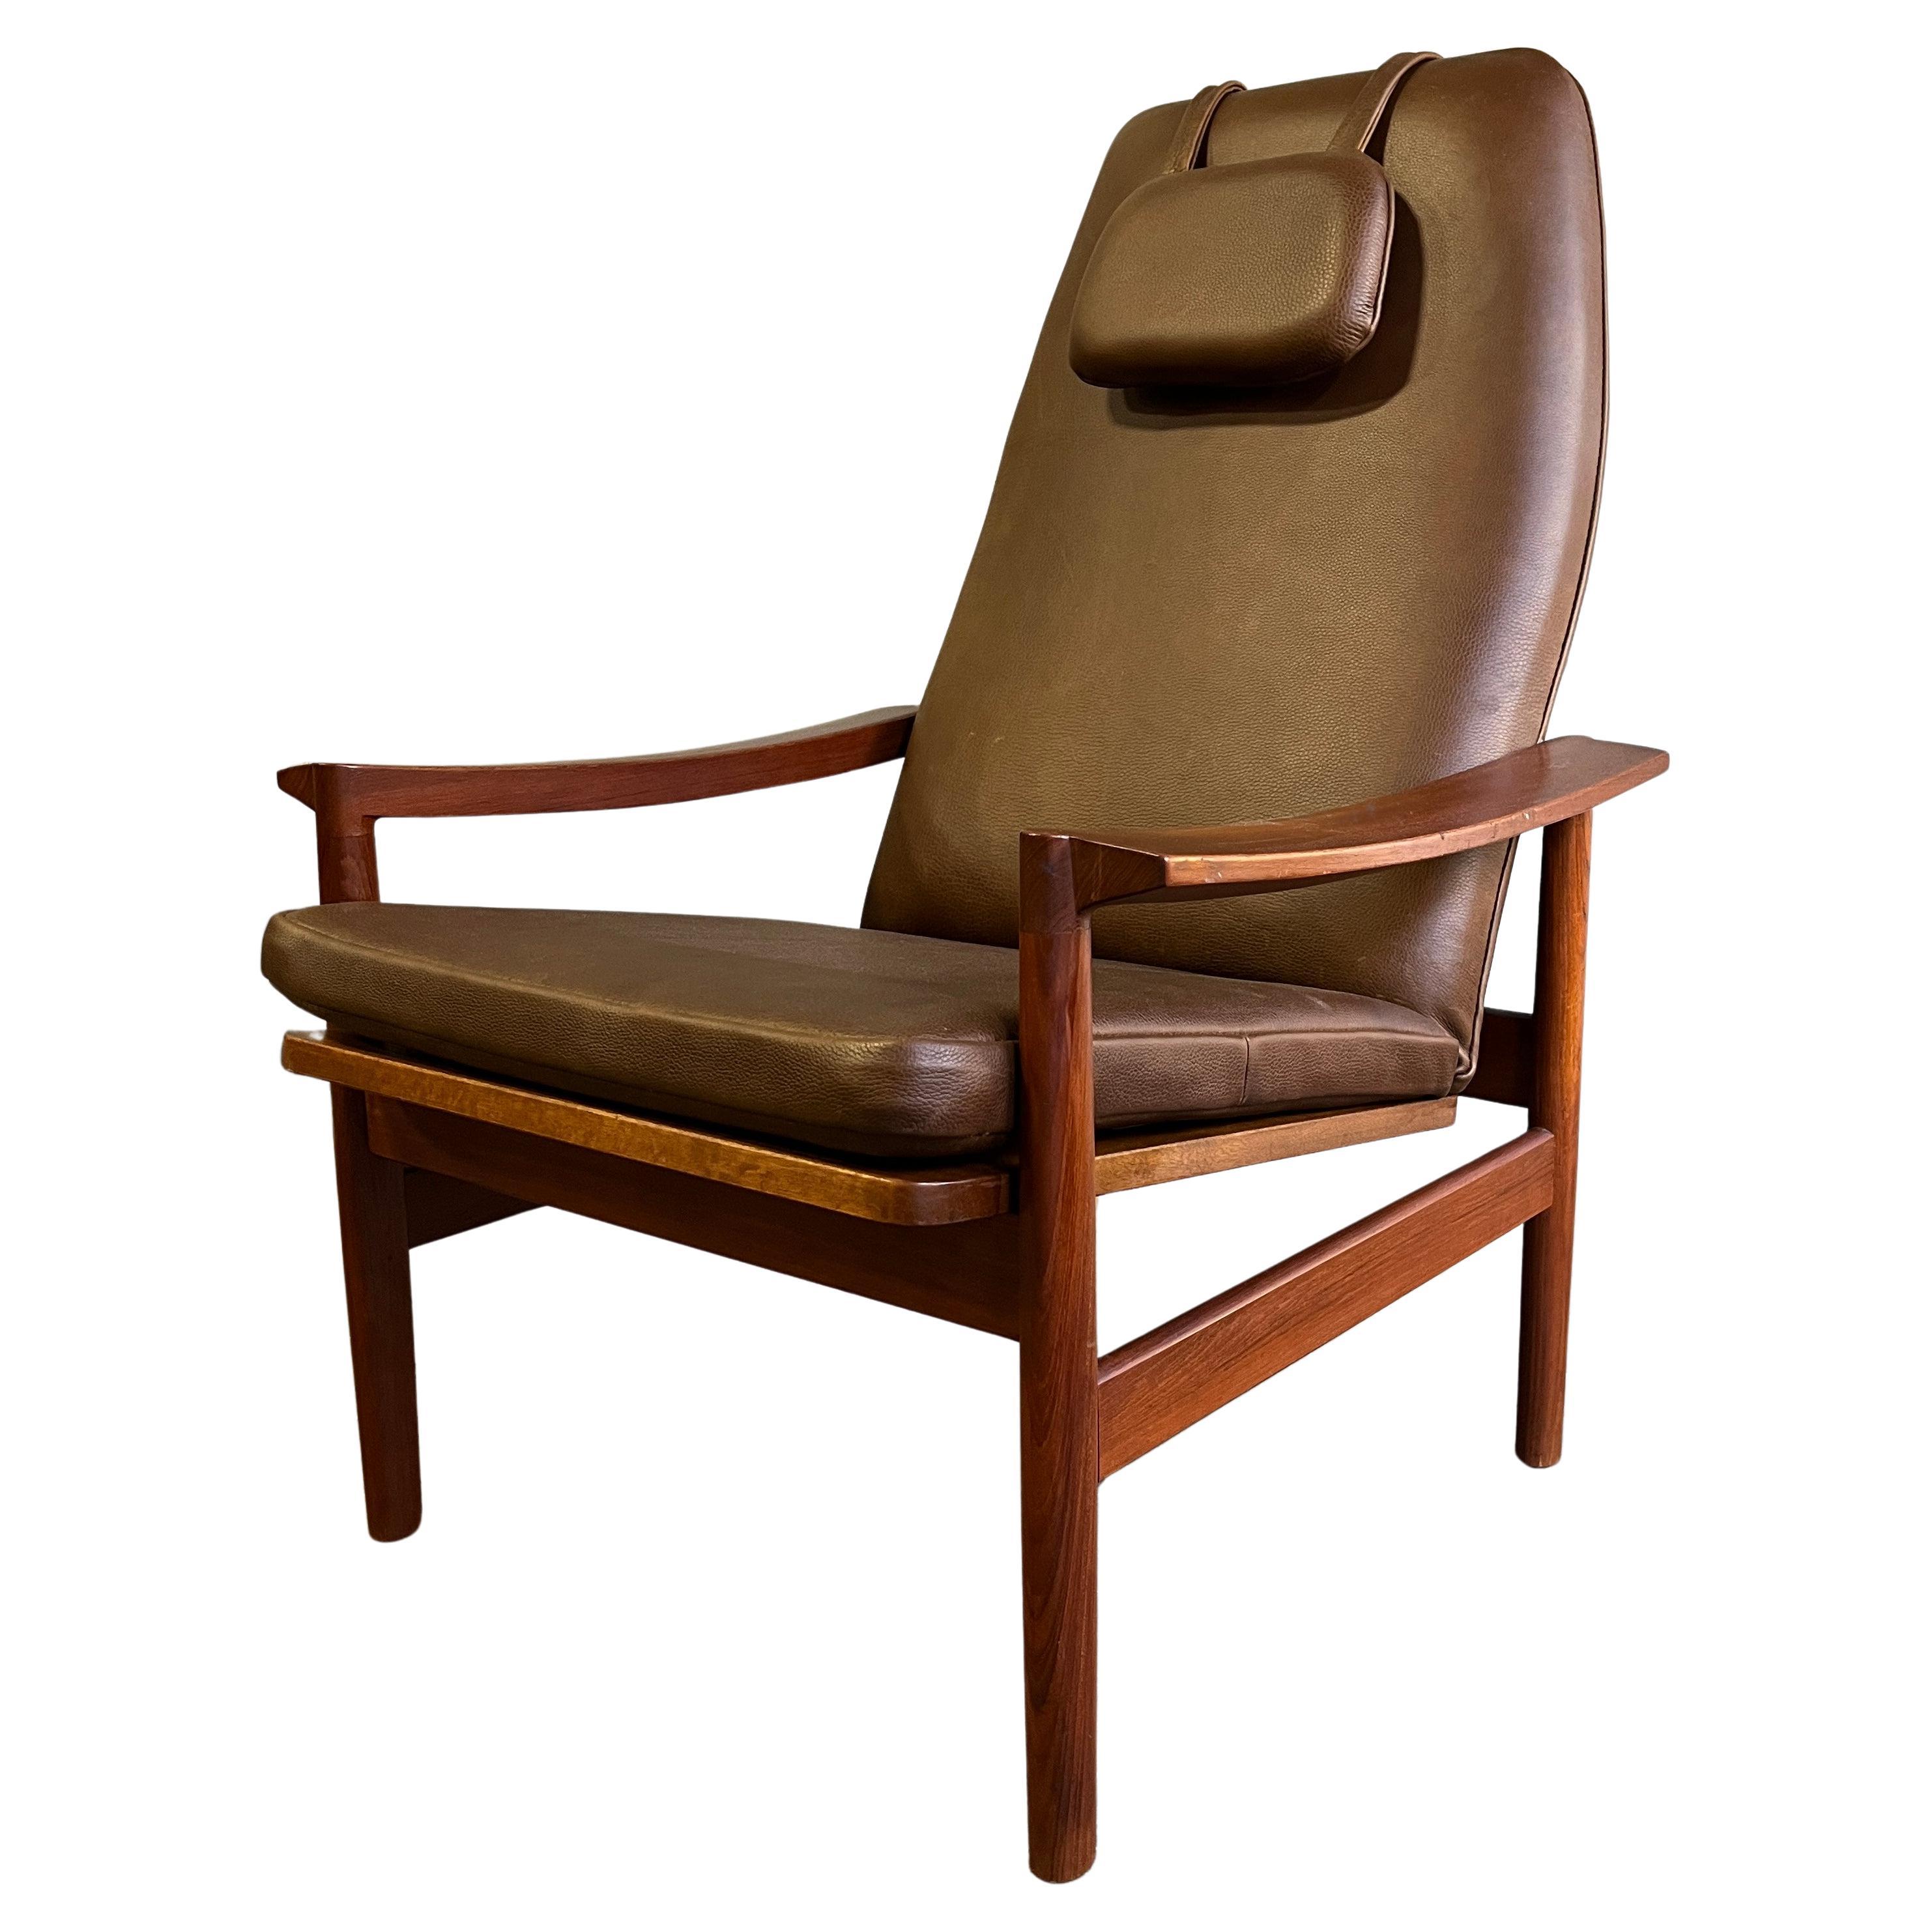 Beautiful Mid-Century Scandinavian Lounge / reclining chair in teakwood with dark thick saddle brown leather. Newly upholstered. Has three positions to recline. Sleek design and wonderful patina. As comfortable as it looks!